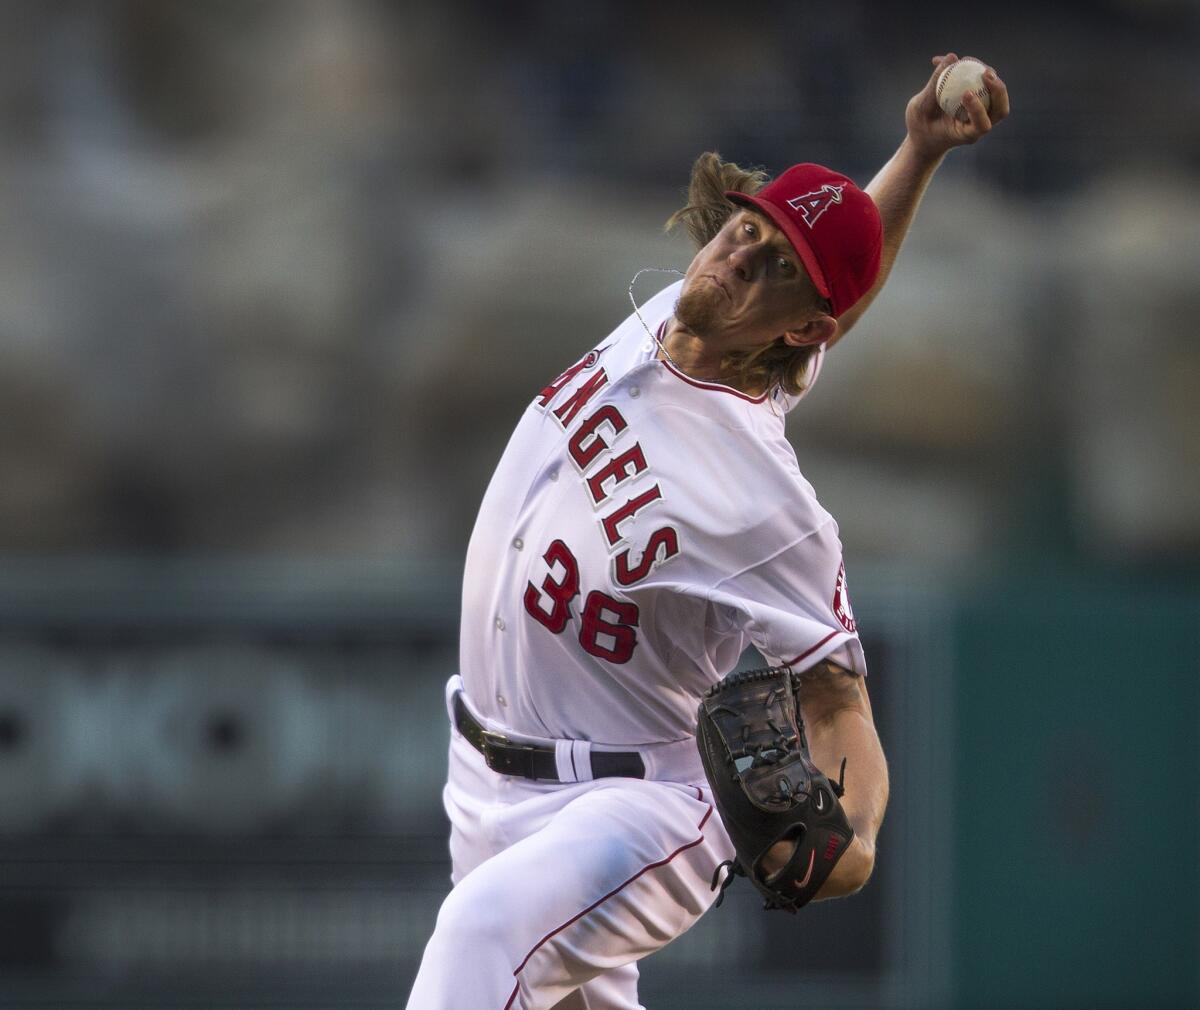 Jered Weaver gave up one run on four hits over seven innings to collect his 17th win of the season. Weaver had 12 strikeouts in the victory.